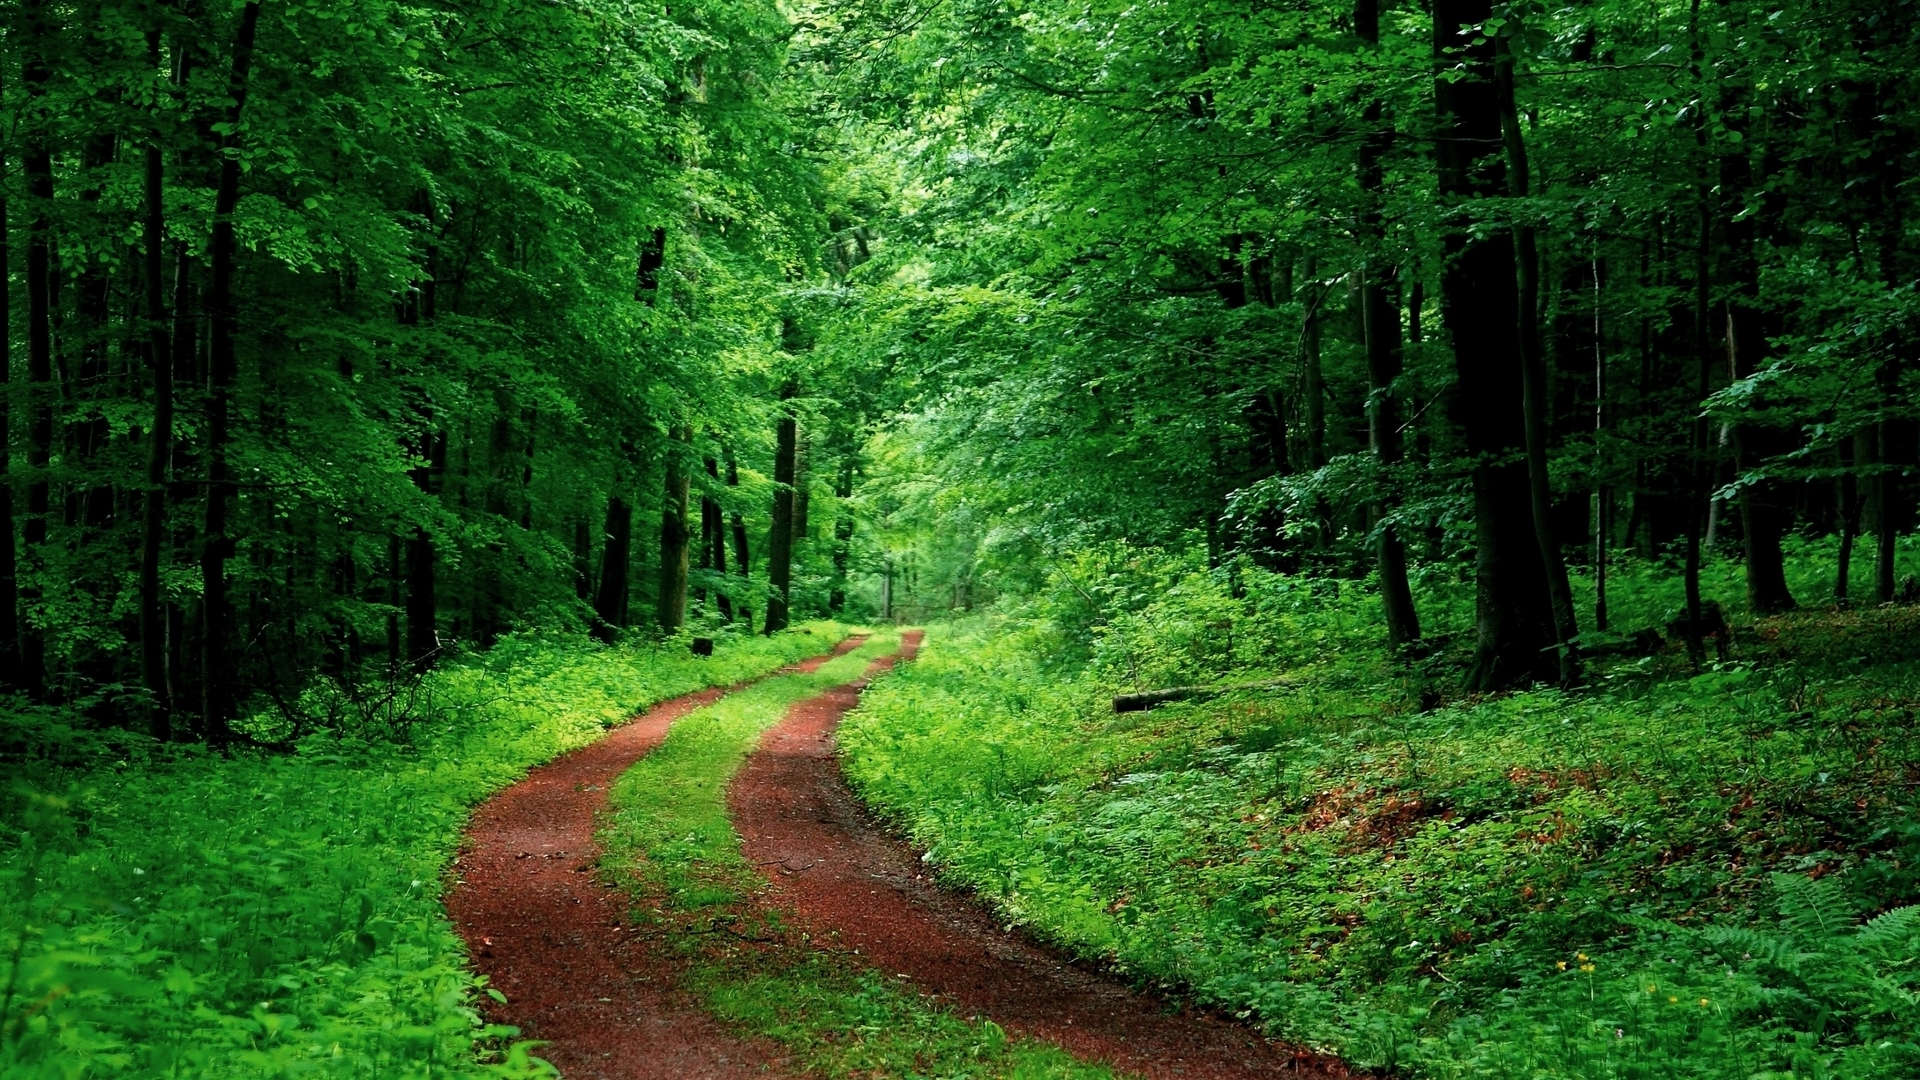 vegetation, green, man made, path, forest, nature, tree